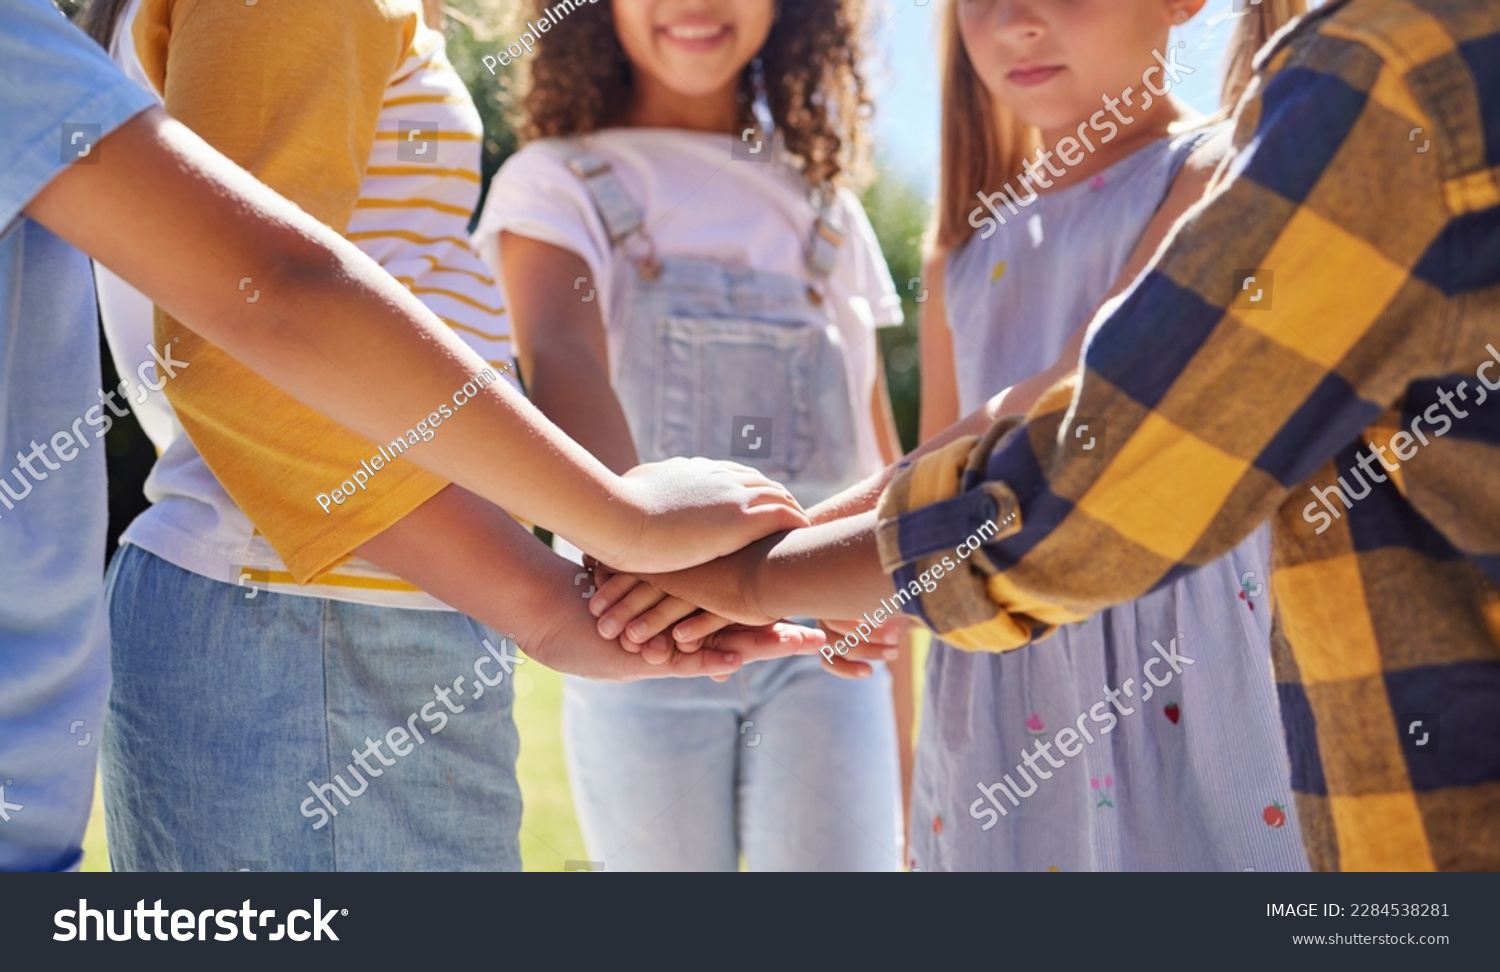 Hands together, support and children outdoor, solidarity and trust with motivation, games or growth. Closeup, kids or youth group with gesture for teamwork, commitment or fun with development or goal #2284538281